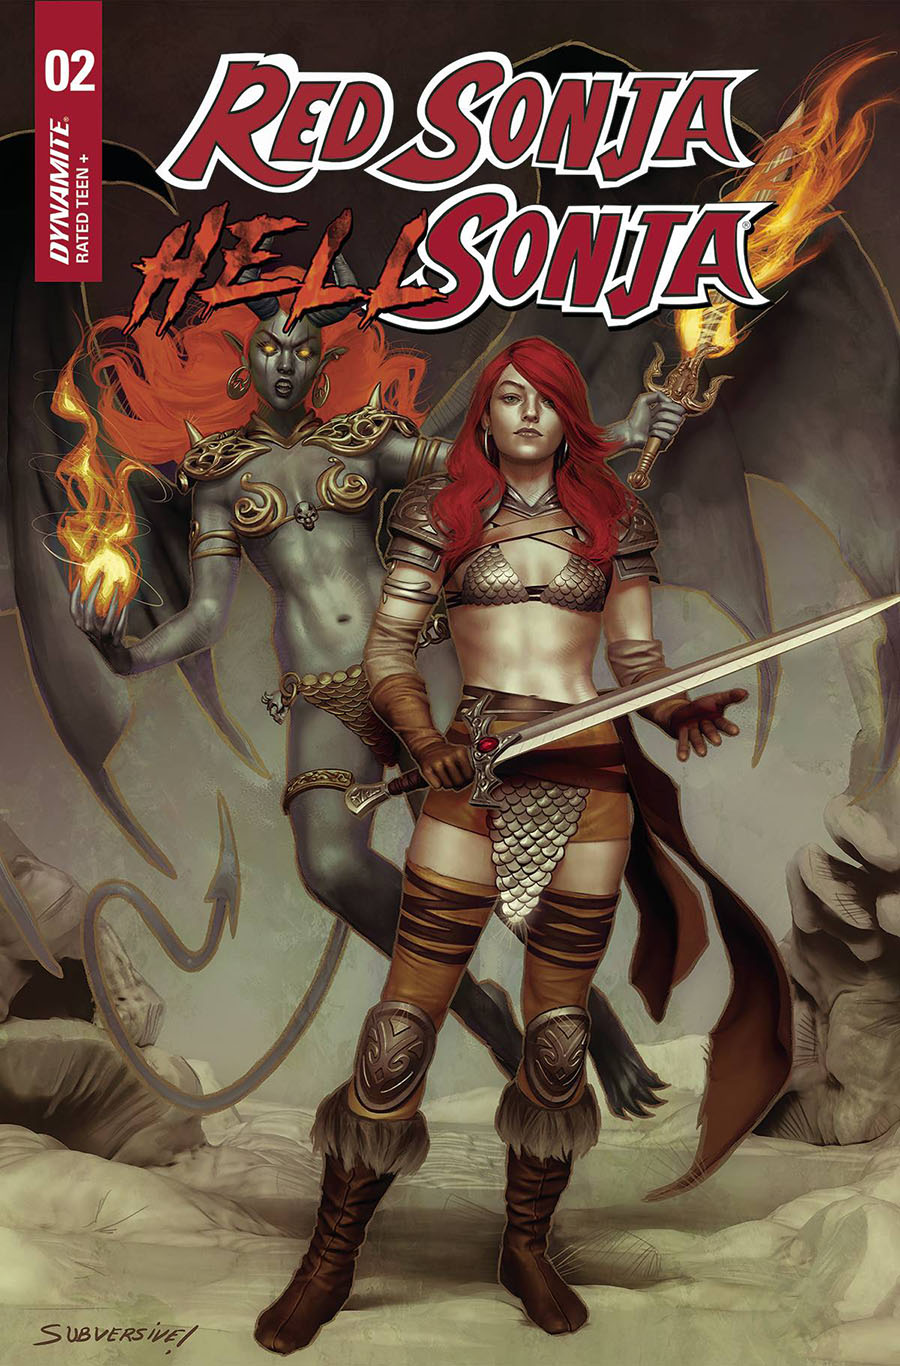 Red Sonja Hell Sonja #2 Cover A Regular Rebeca Puebla Cover